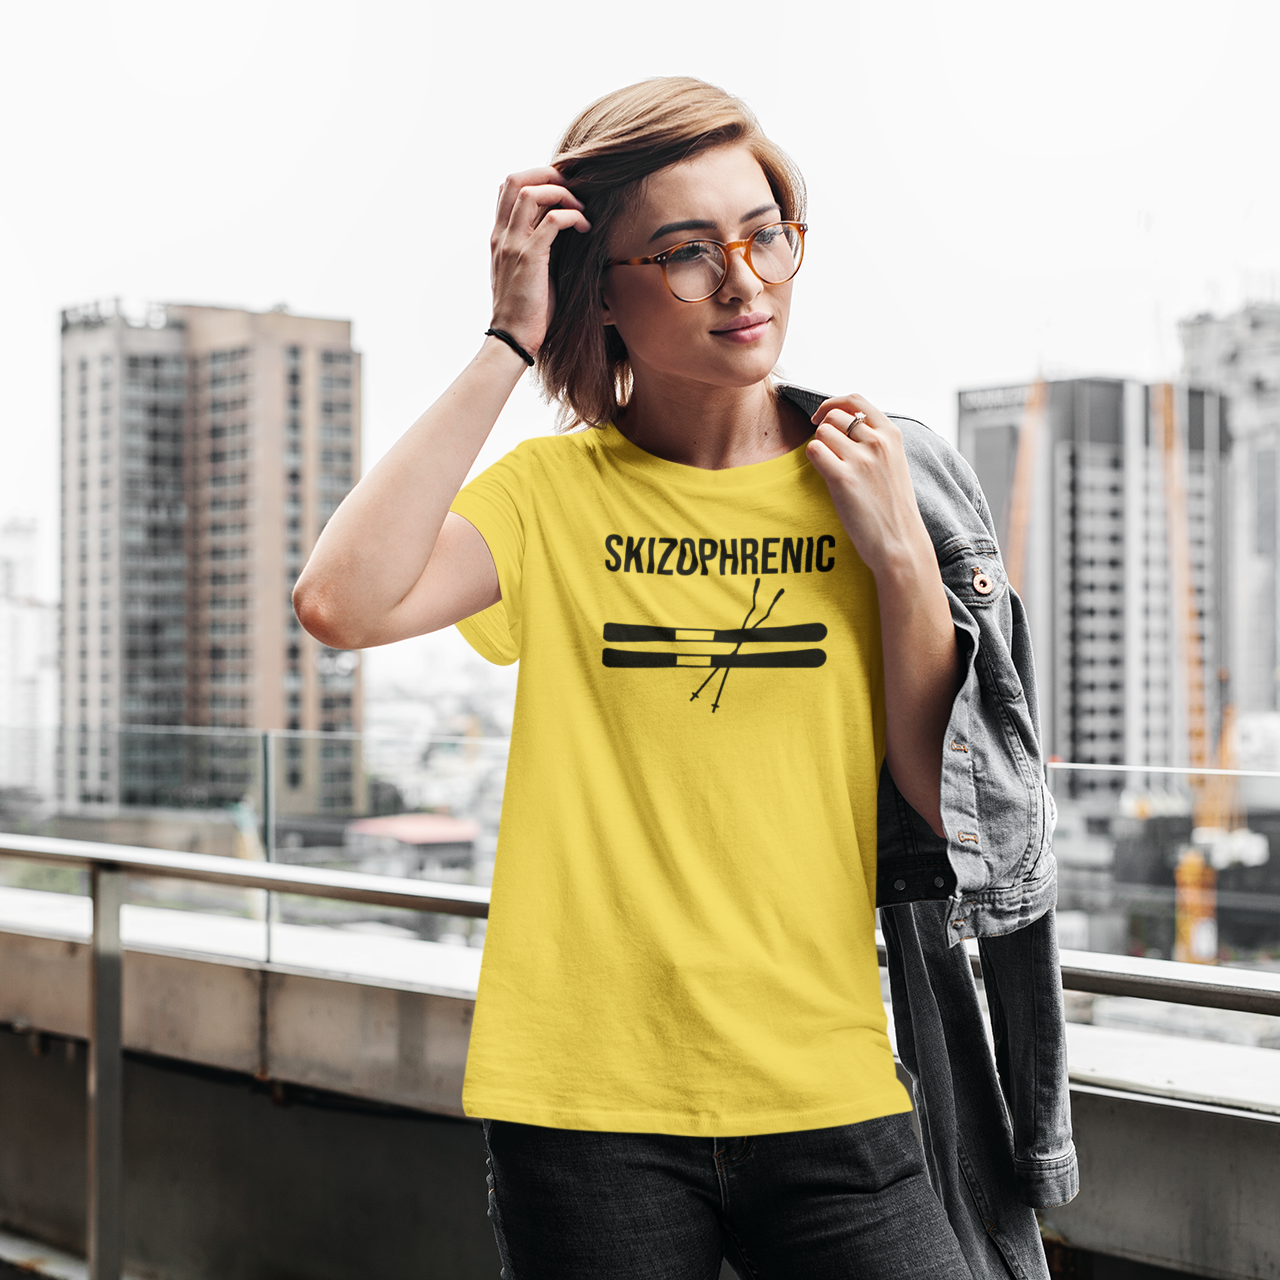 Woman with glasses in the city wearing yekllow shirt with 'Skizophrenic' print by KMLeon.